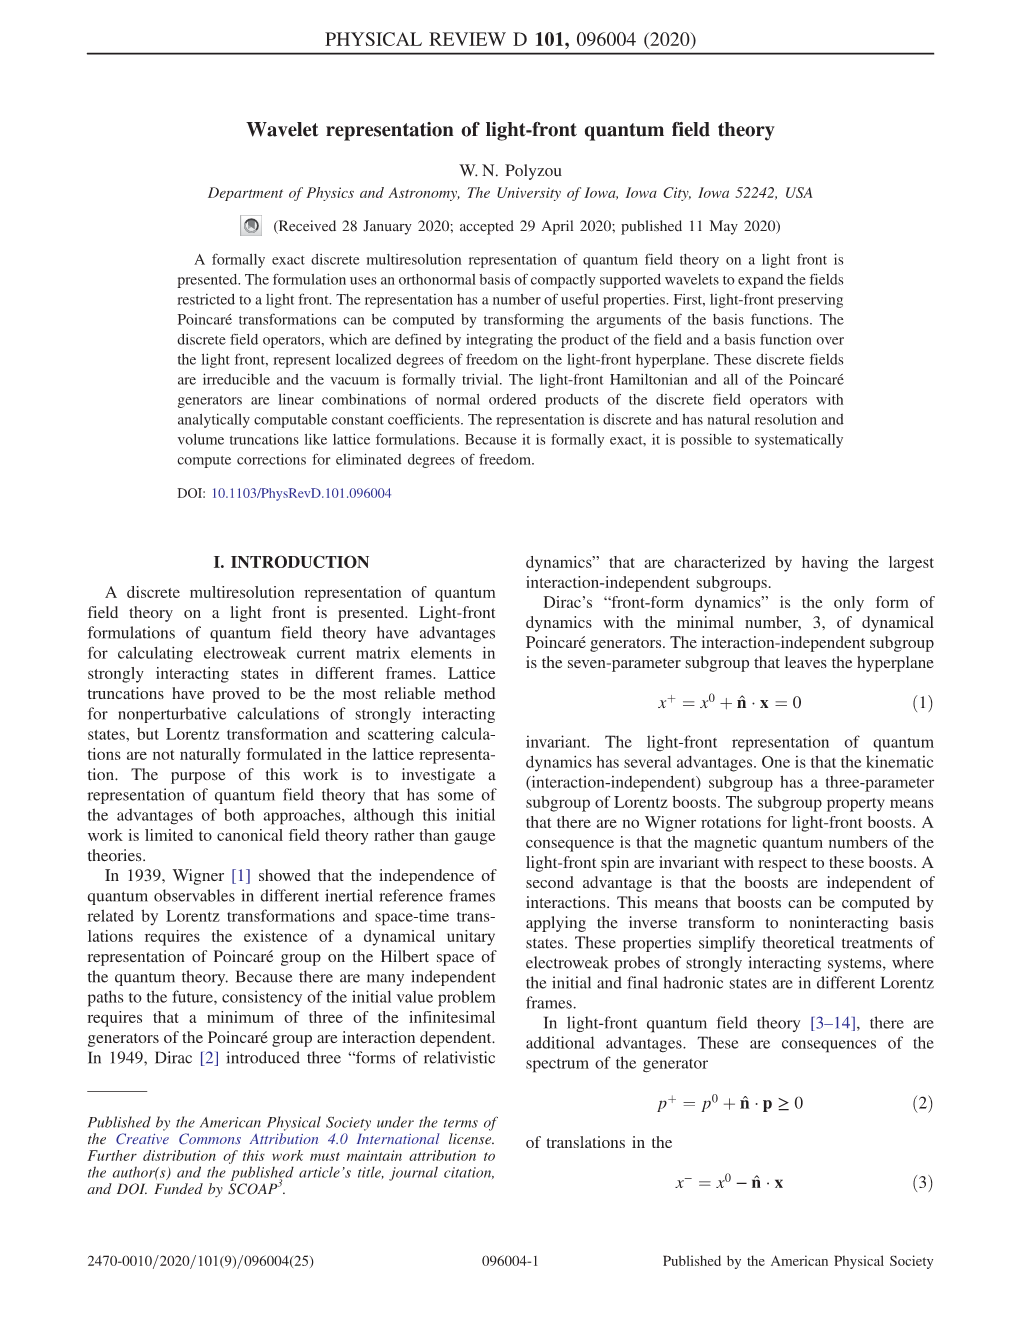 Wavelet Representation of Light-Front Quantum Field Theory